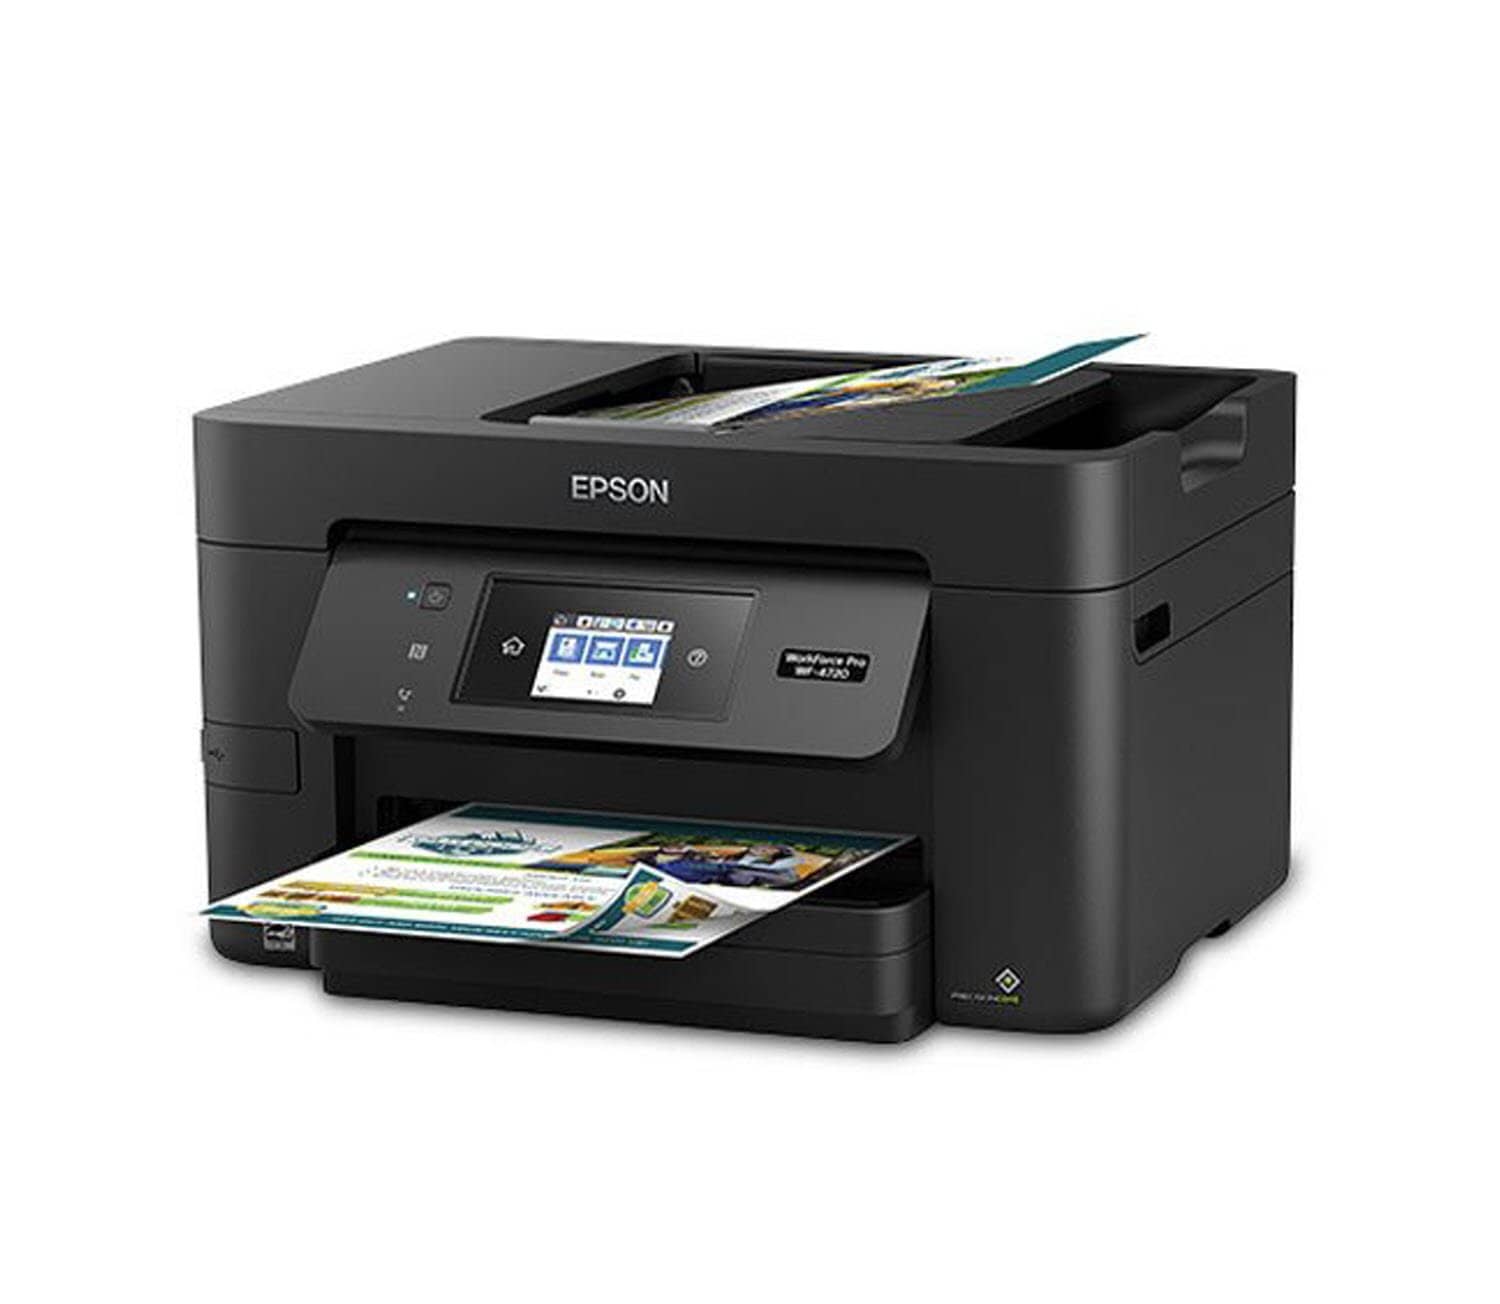 Epson WorkForce Pro WF-4720 Wireless All-in-One Color Inkjet Printer Ink Combo